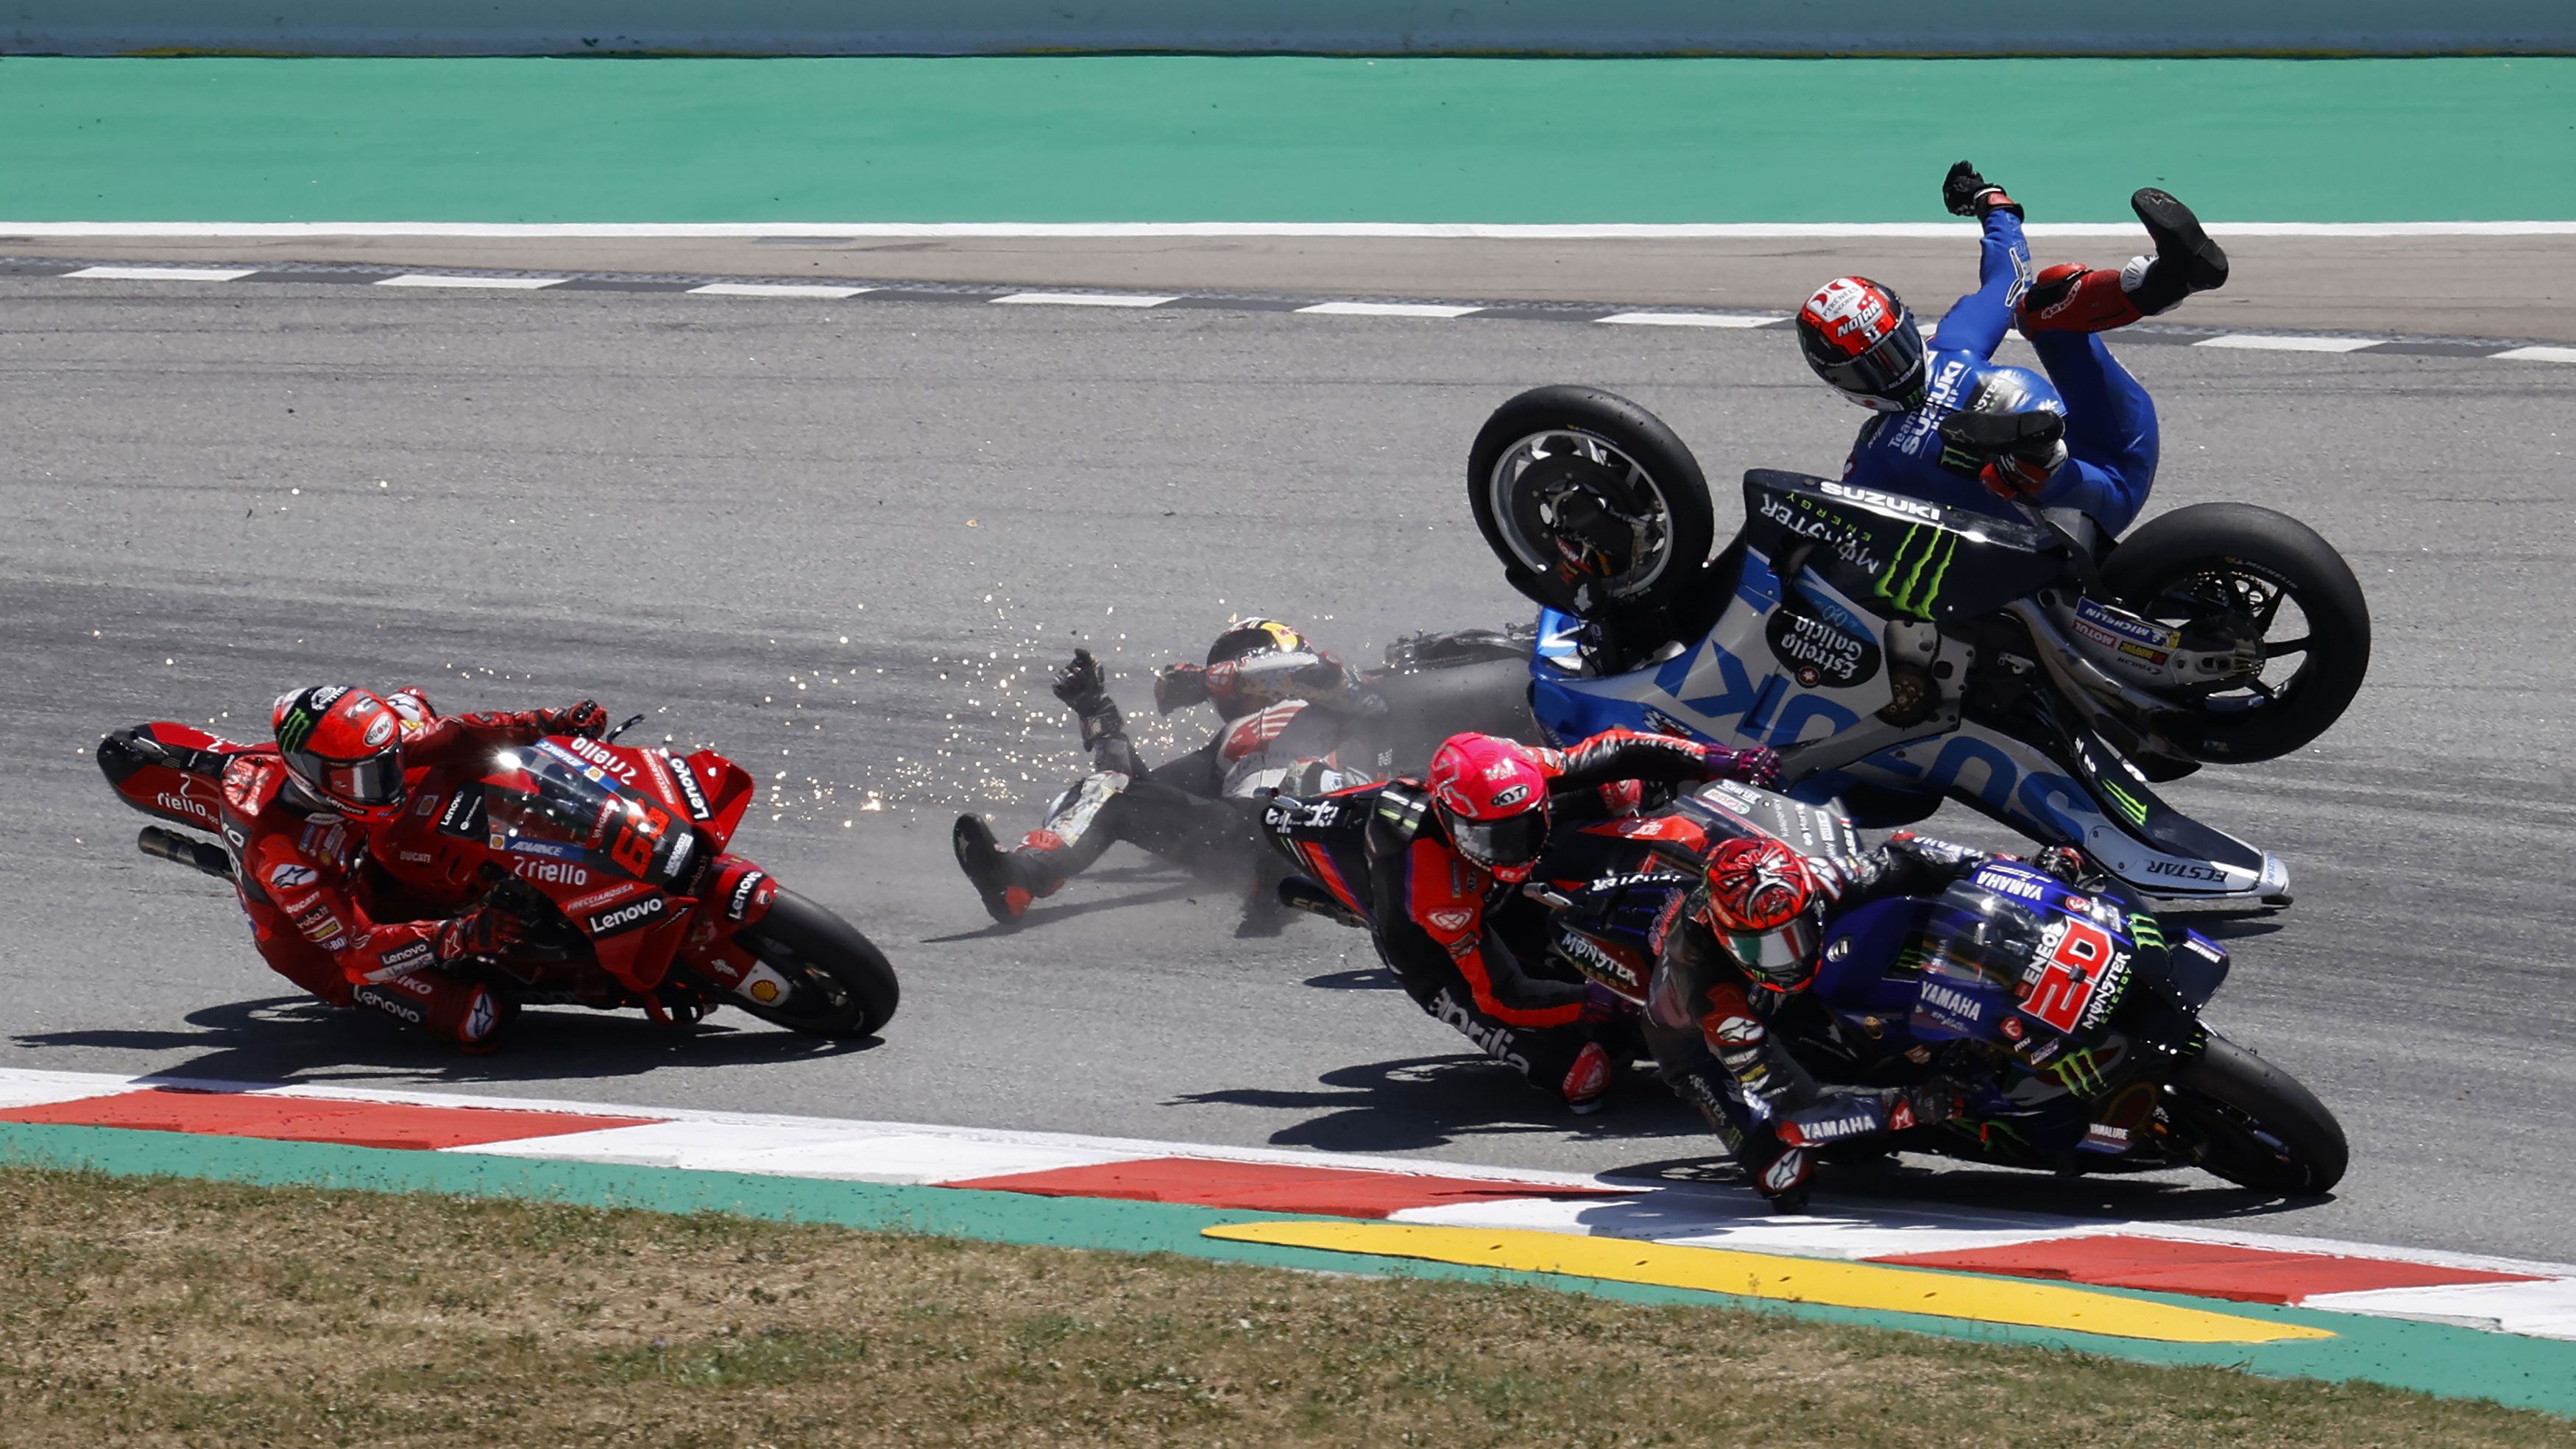 MotoGP rider Takaaki Nakagami criticised after lucky escape